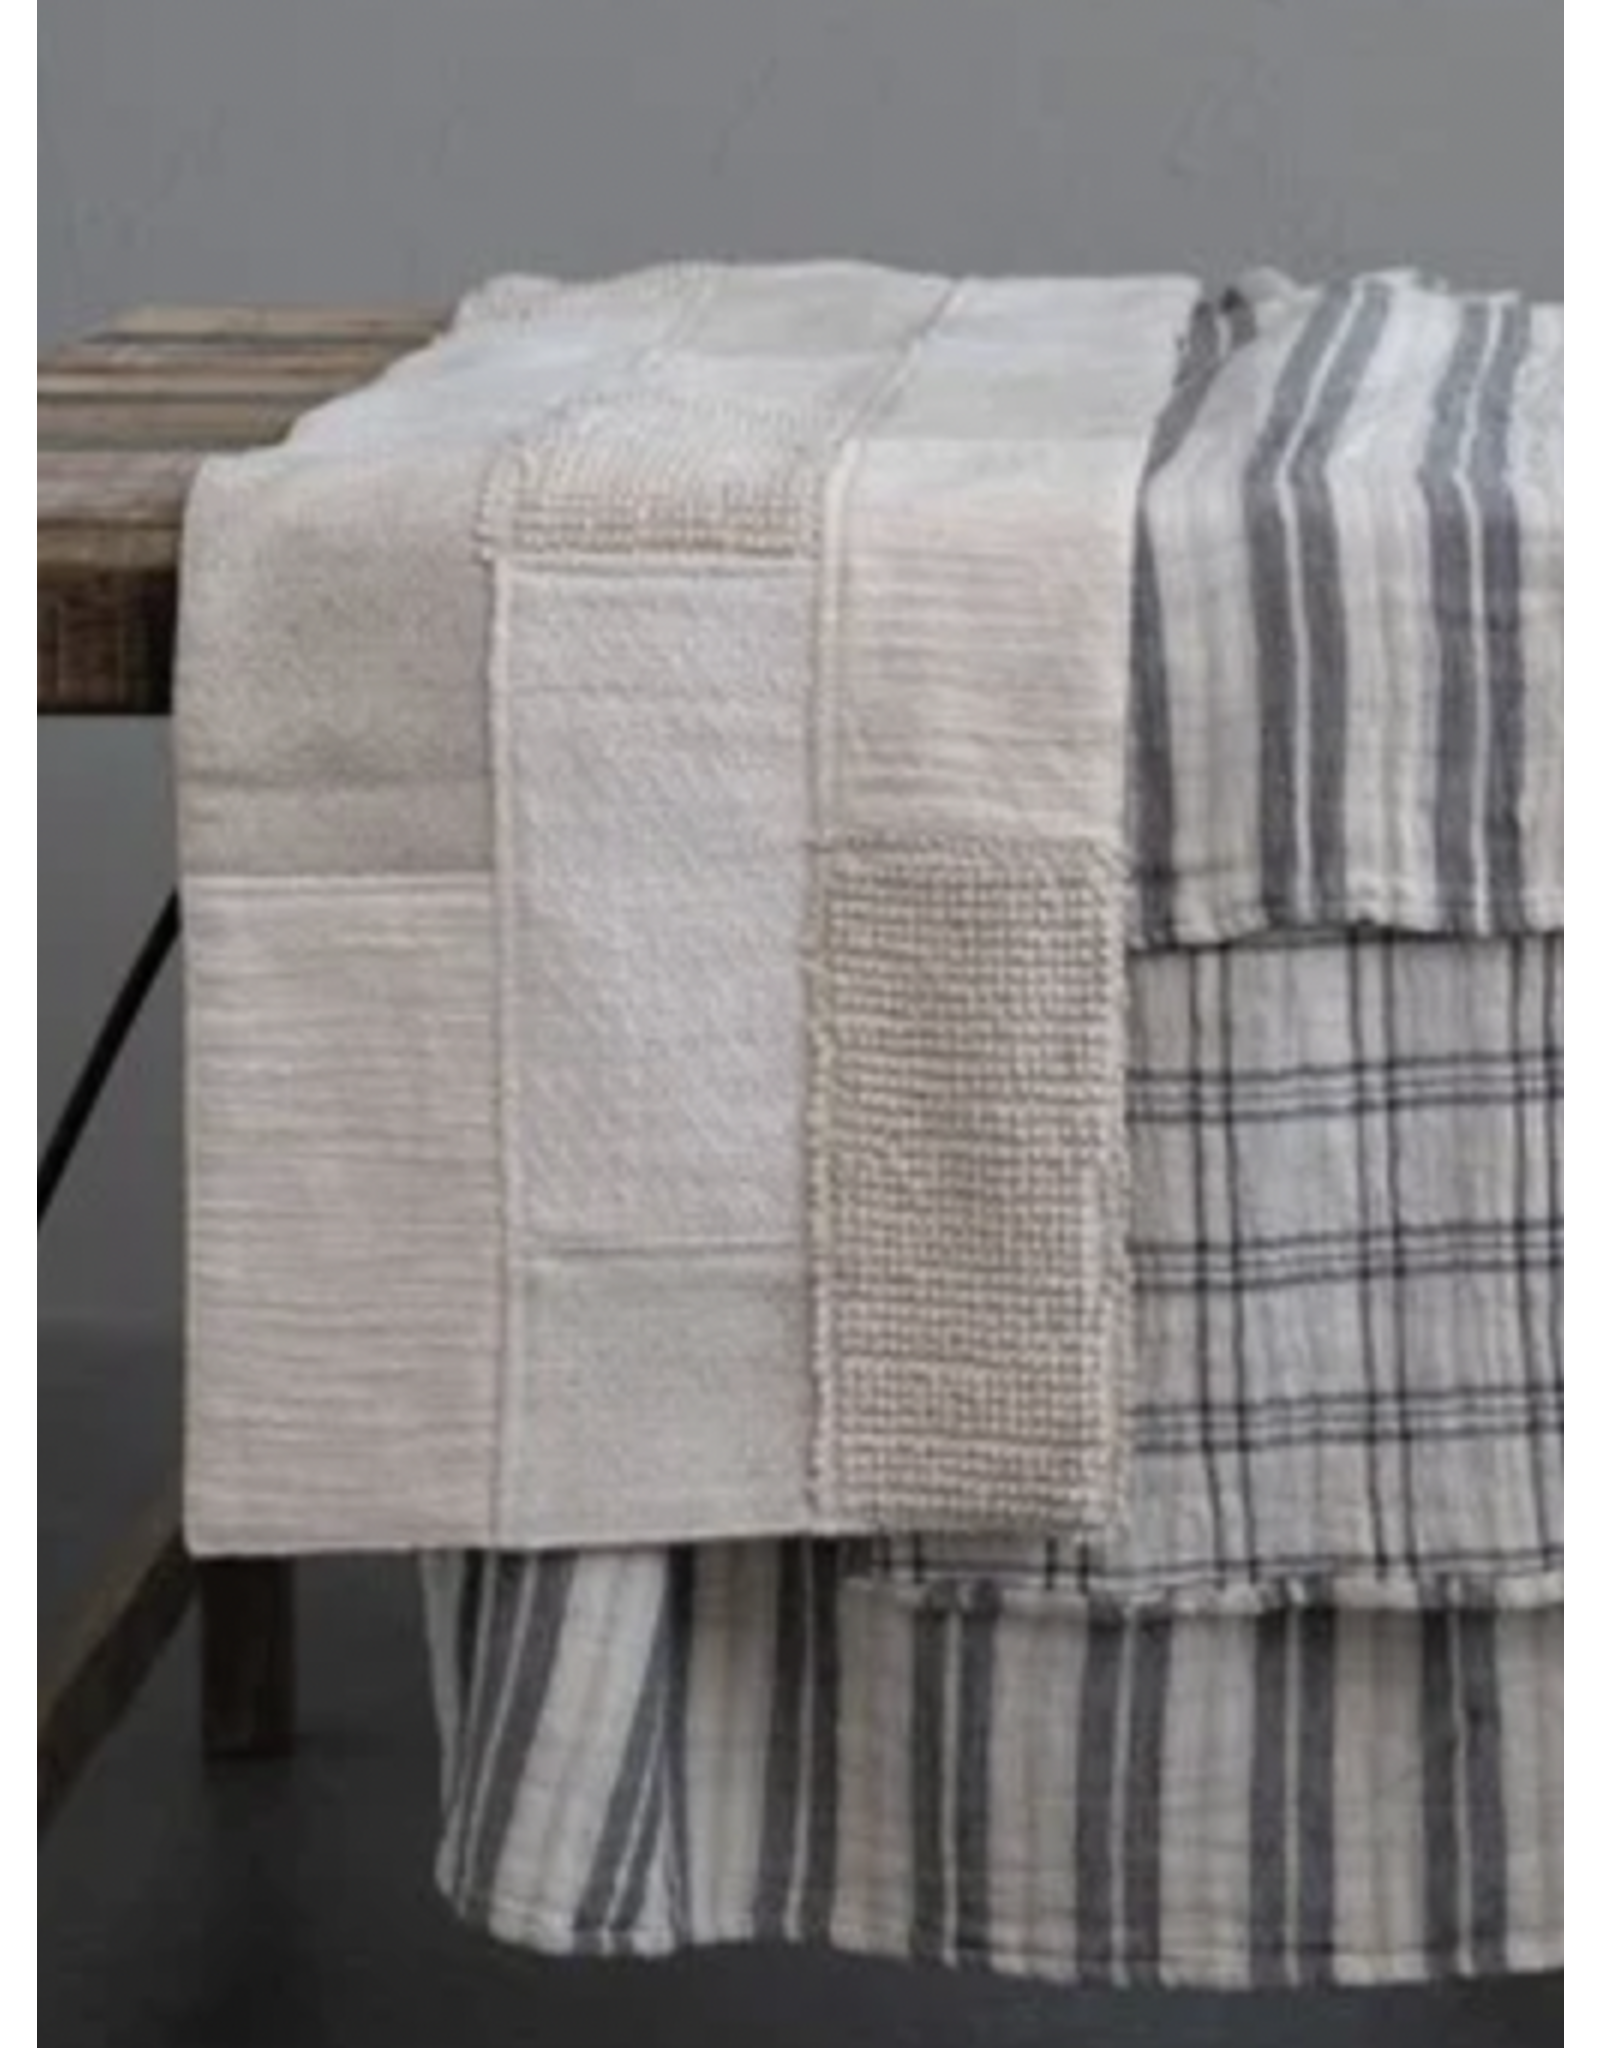 Creative Co-Op Cotton Patchwork Table Runner